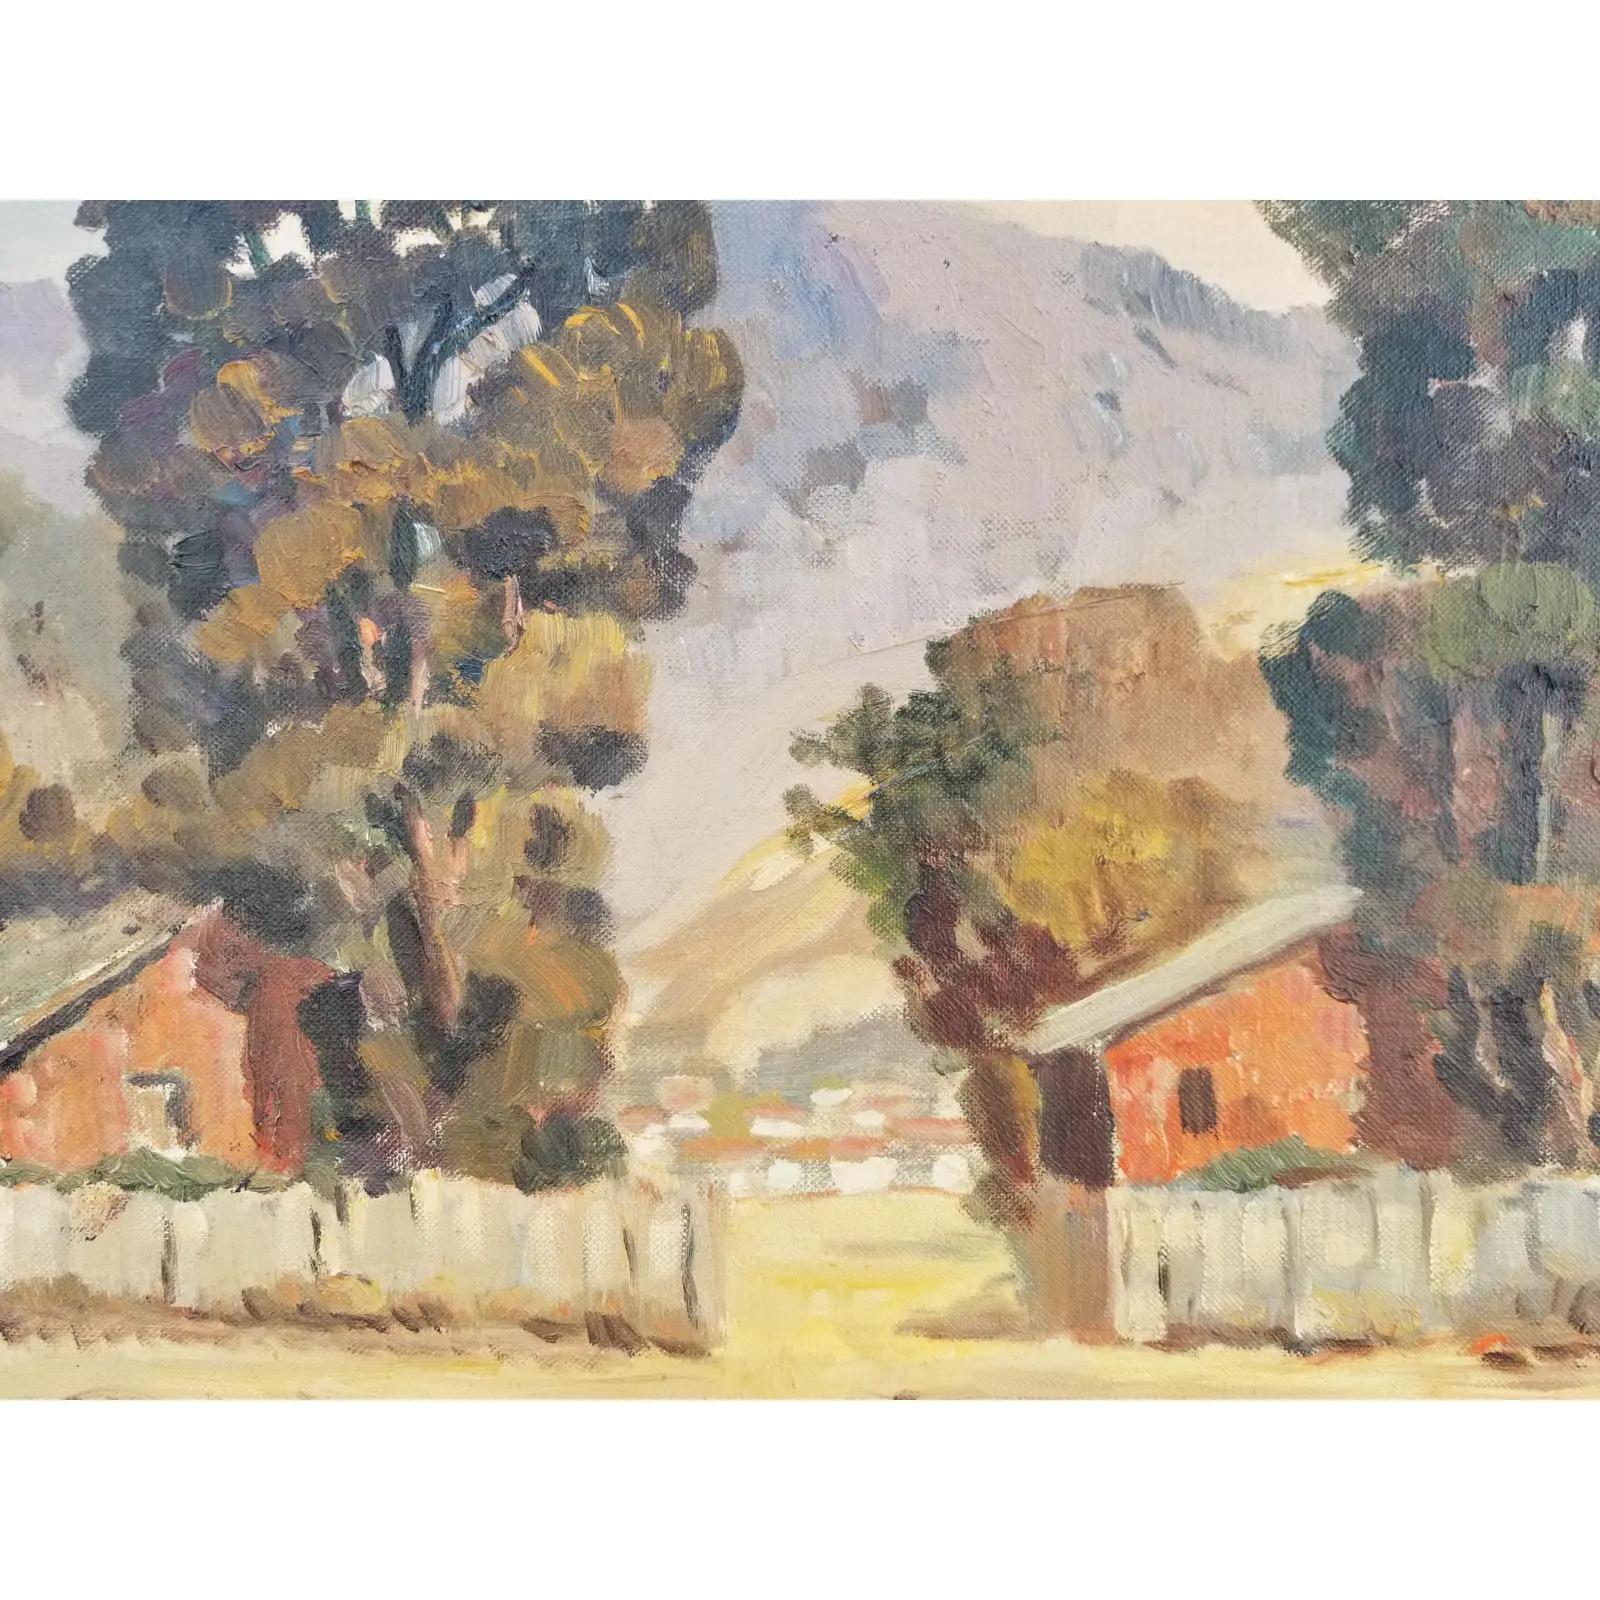 California landscape painting by California San Francisco bay area artist Galen Russell Wolf, circa 1950s. Subject matter 2 red barns, eucalyptus trees and the town of half moon bay in background. Oil on canvas, signed lower right. Appears to have